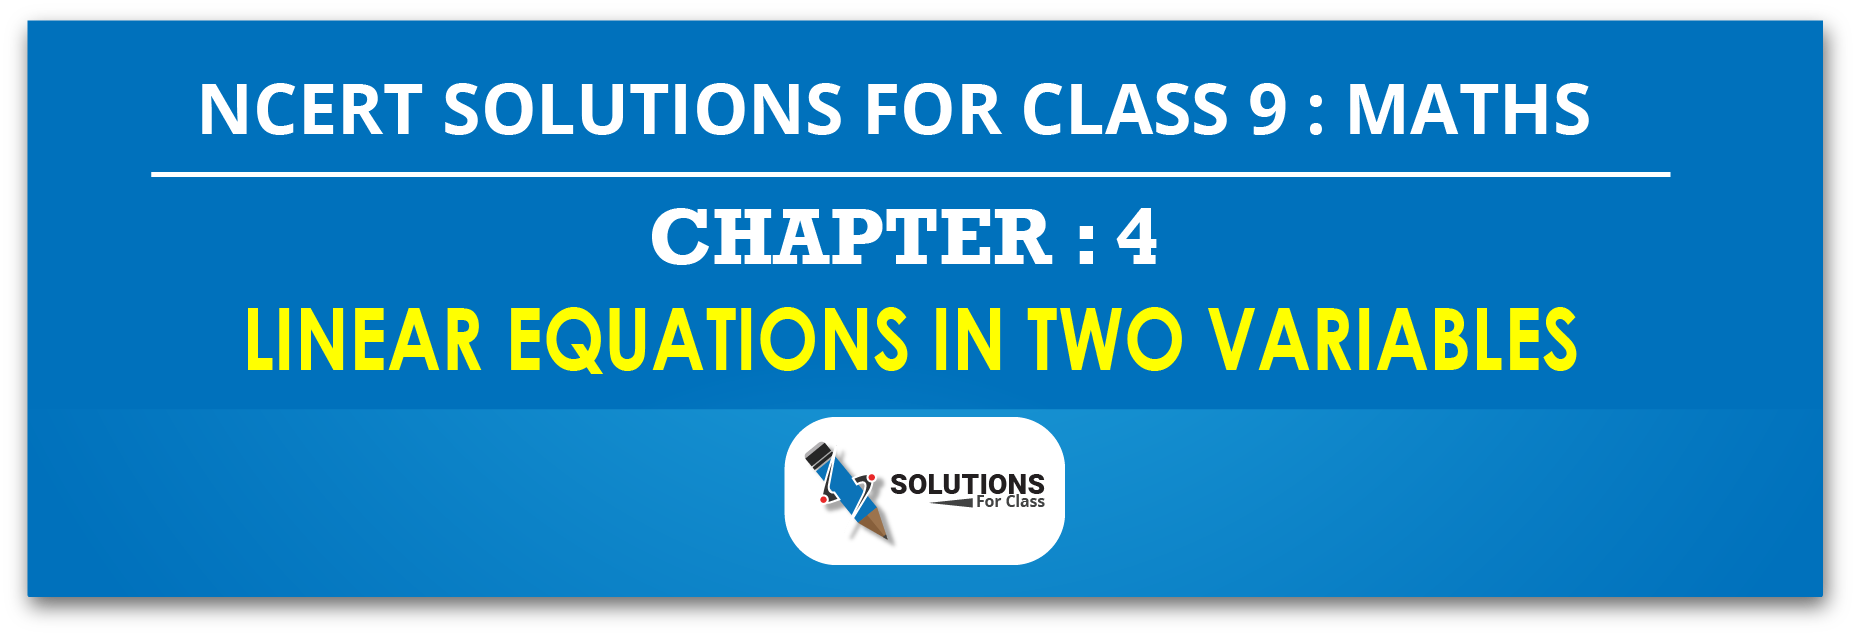 NCERT Solution For Class 9, Maths, Chapter 4, Linear Equations In Two Variables